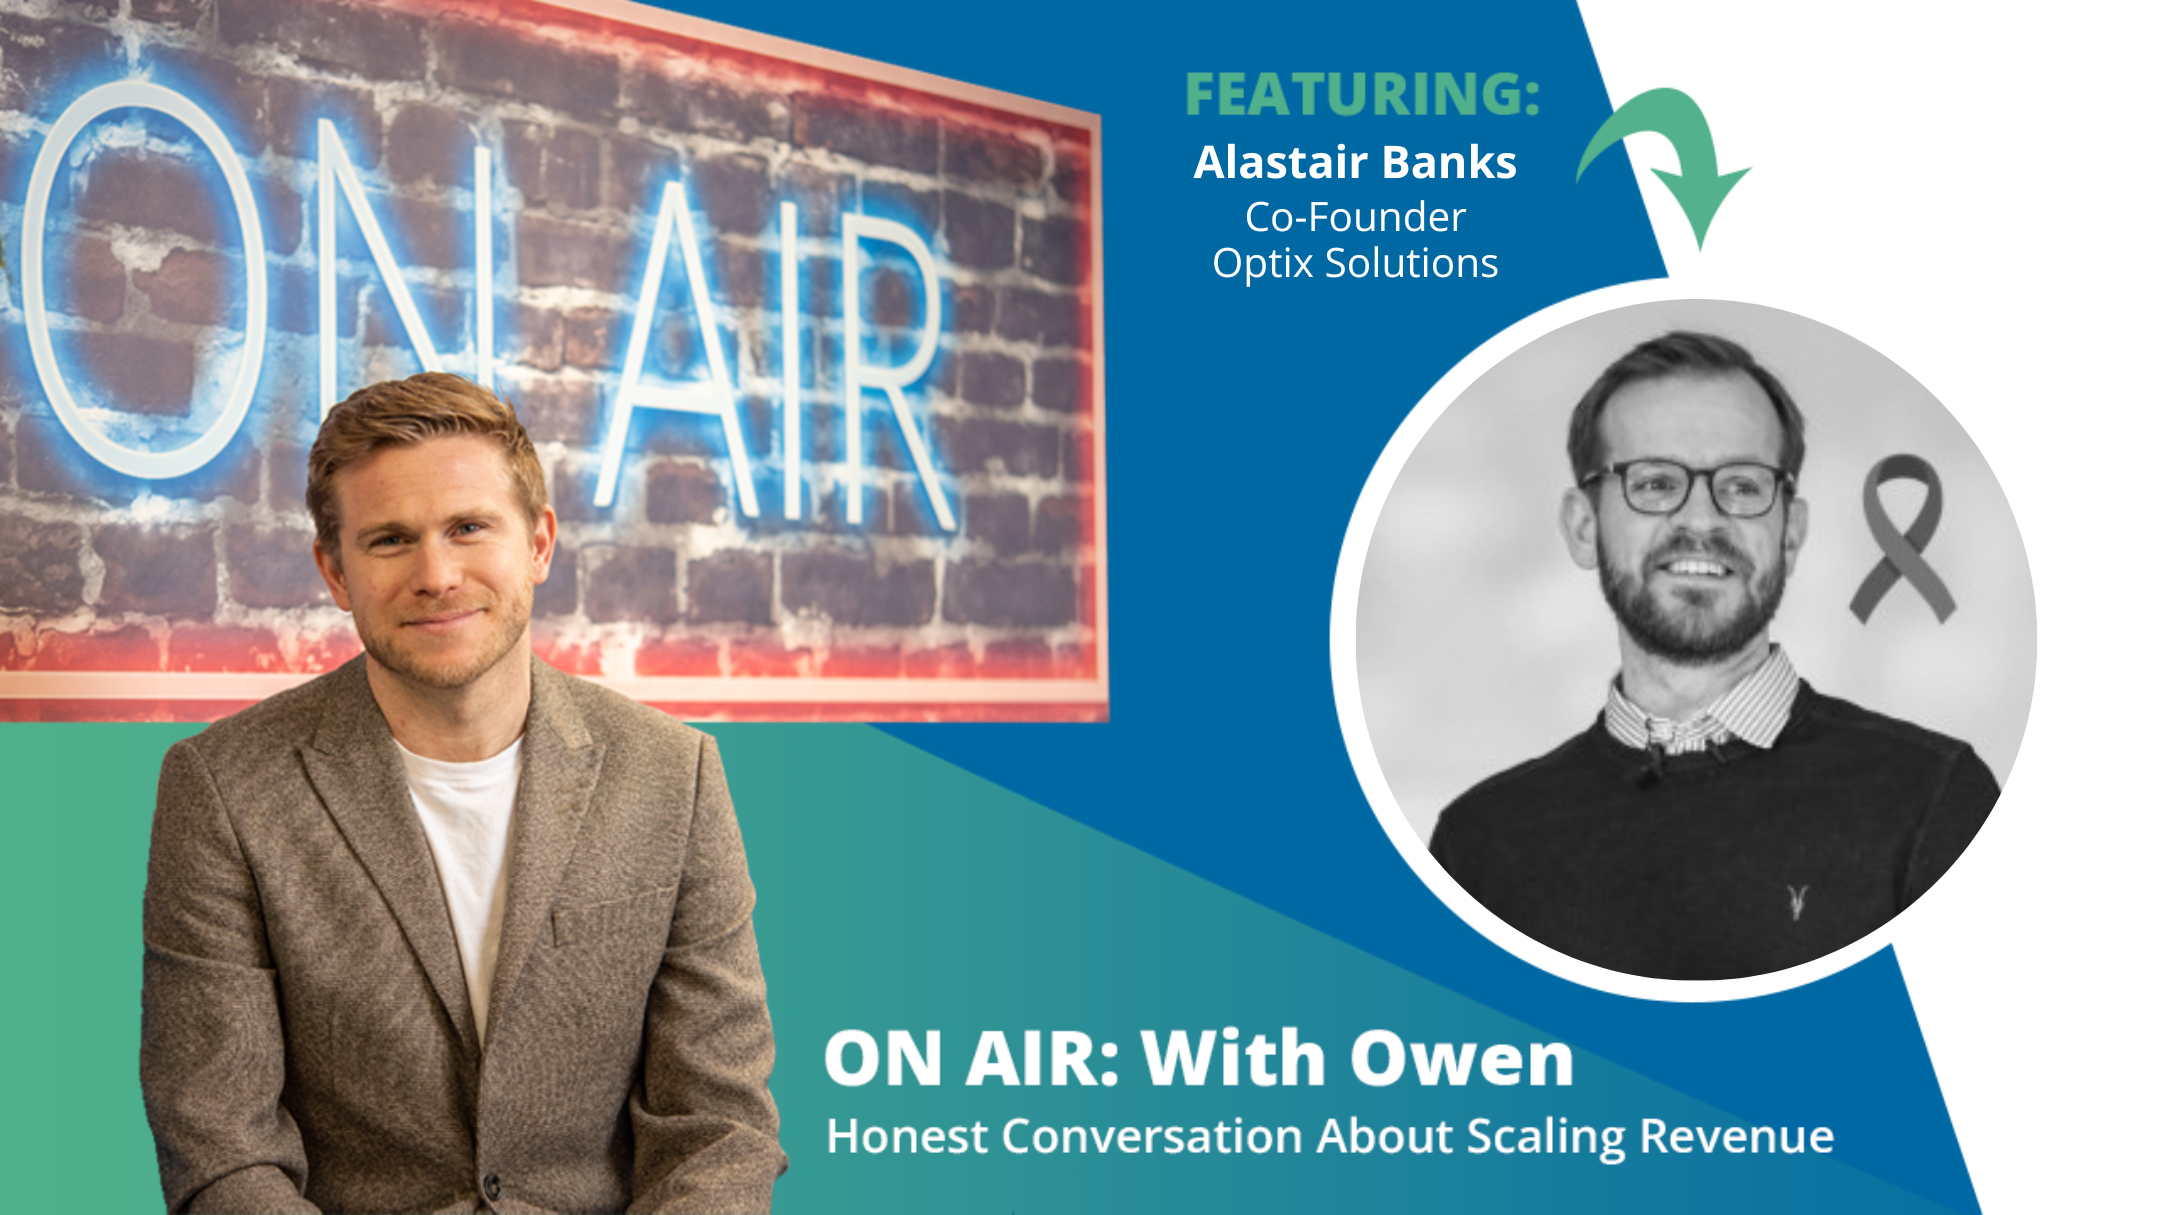 ON AIR: With Owen Episode 74 Featuring Alastair Banks – Co-Founder, Optix Solutions